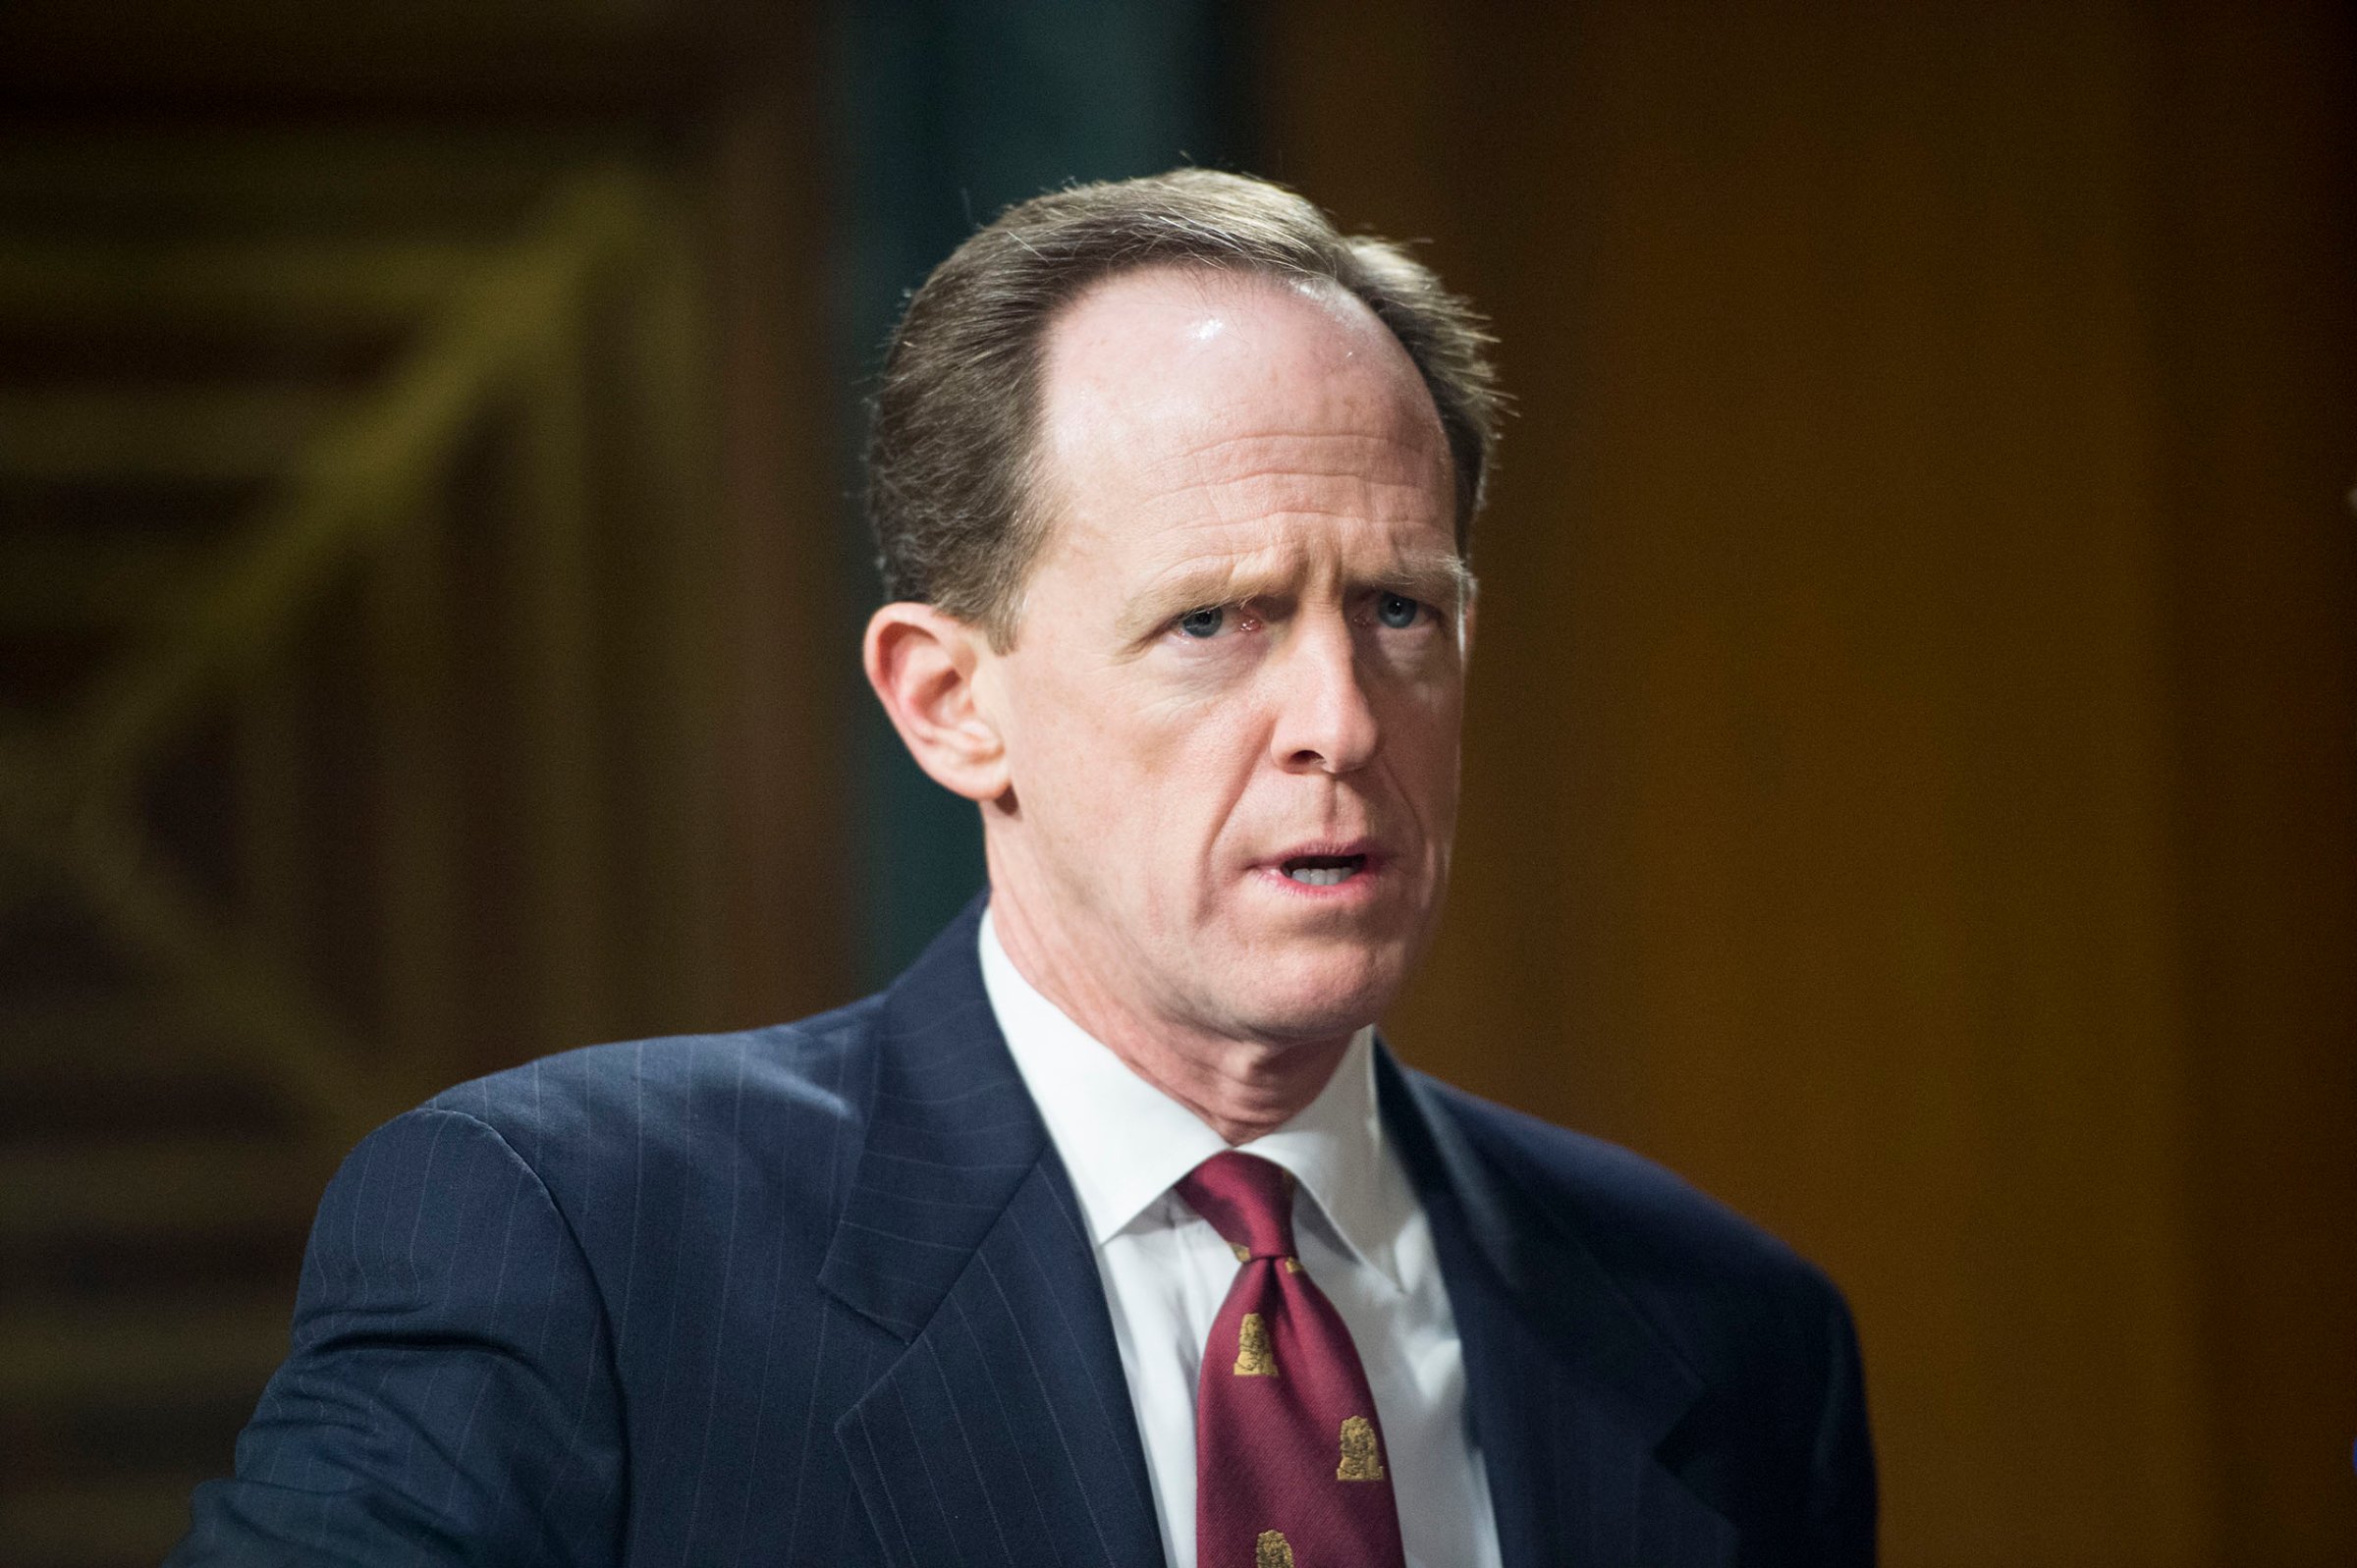 Pat Toomey arrives for the Senate Banking, Housing and Urban Affairs Committee hearing on "The Semiannual Monetary Policy Report to the Congress" on Feb. 24, 2015.